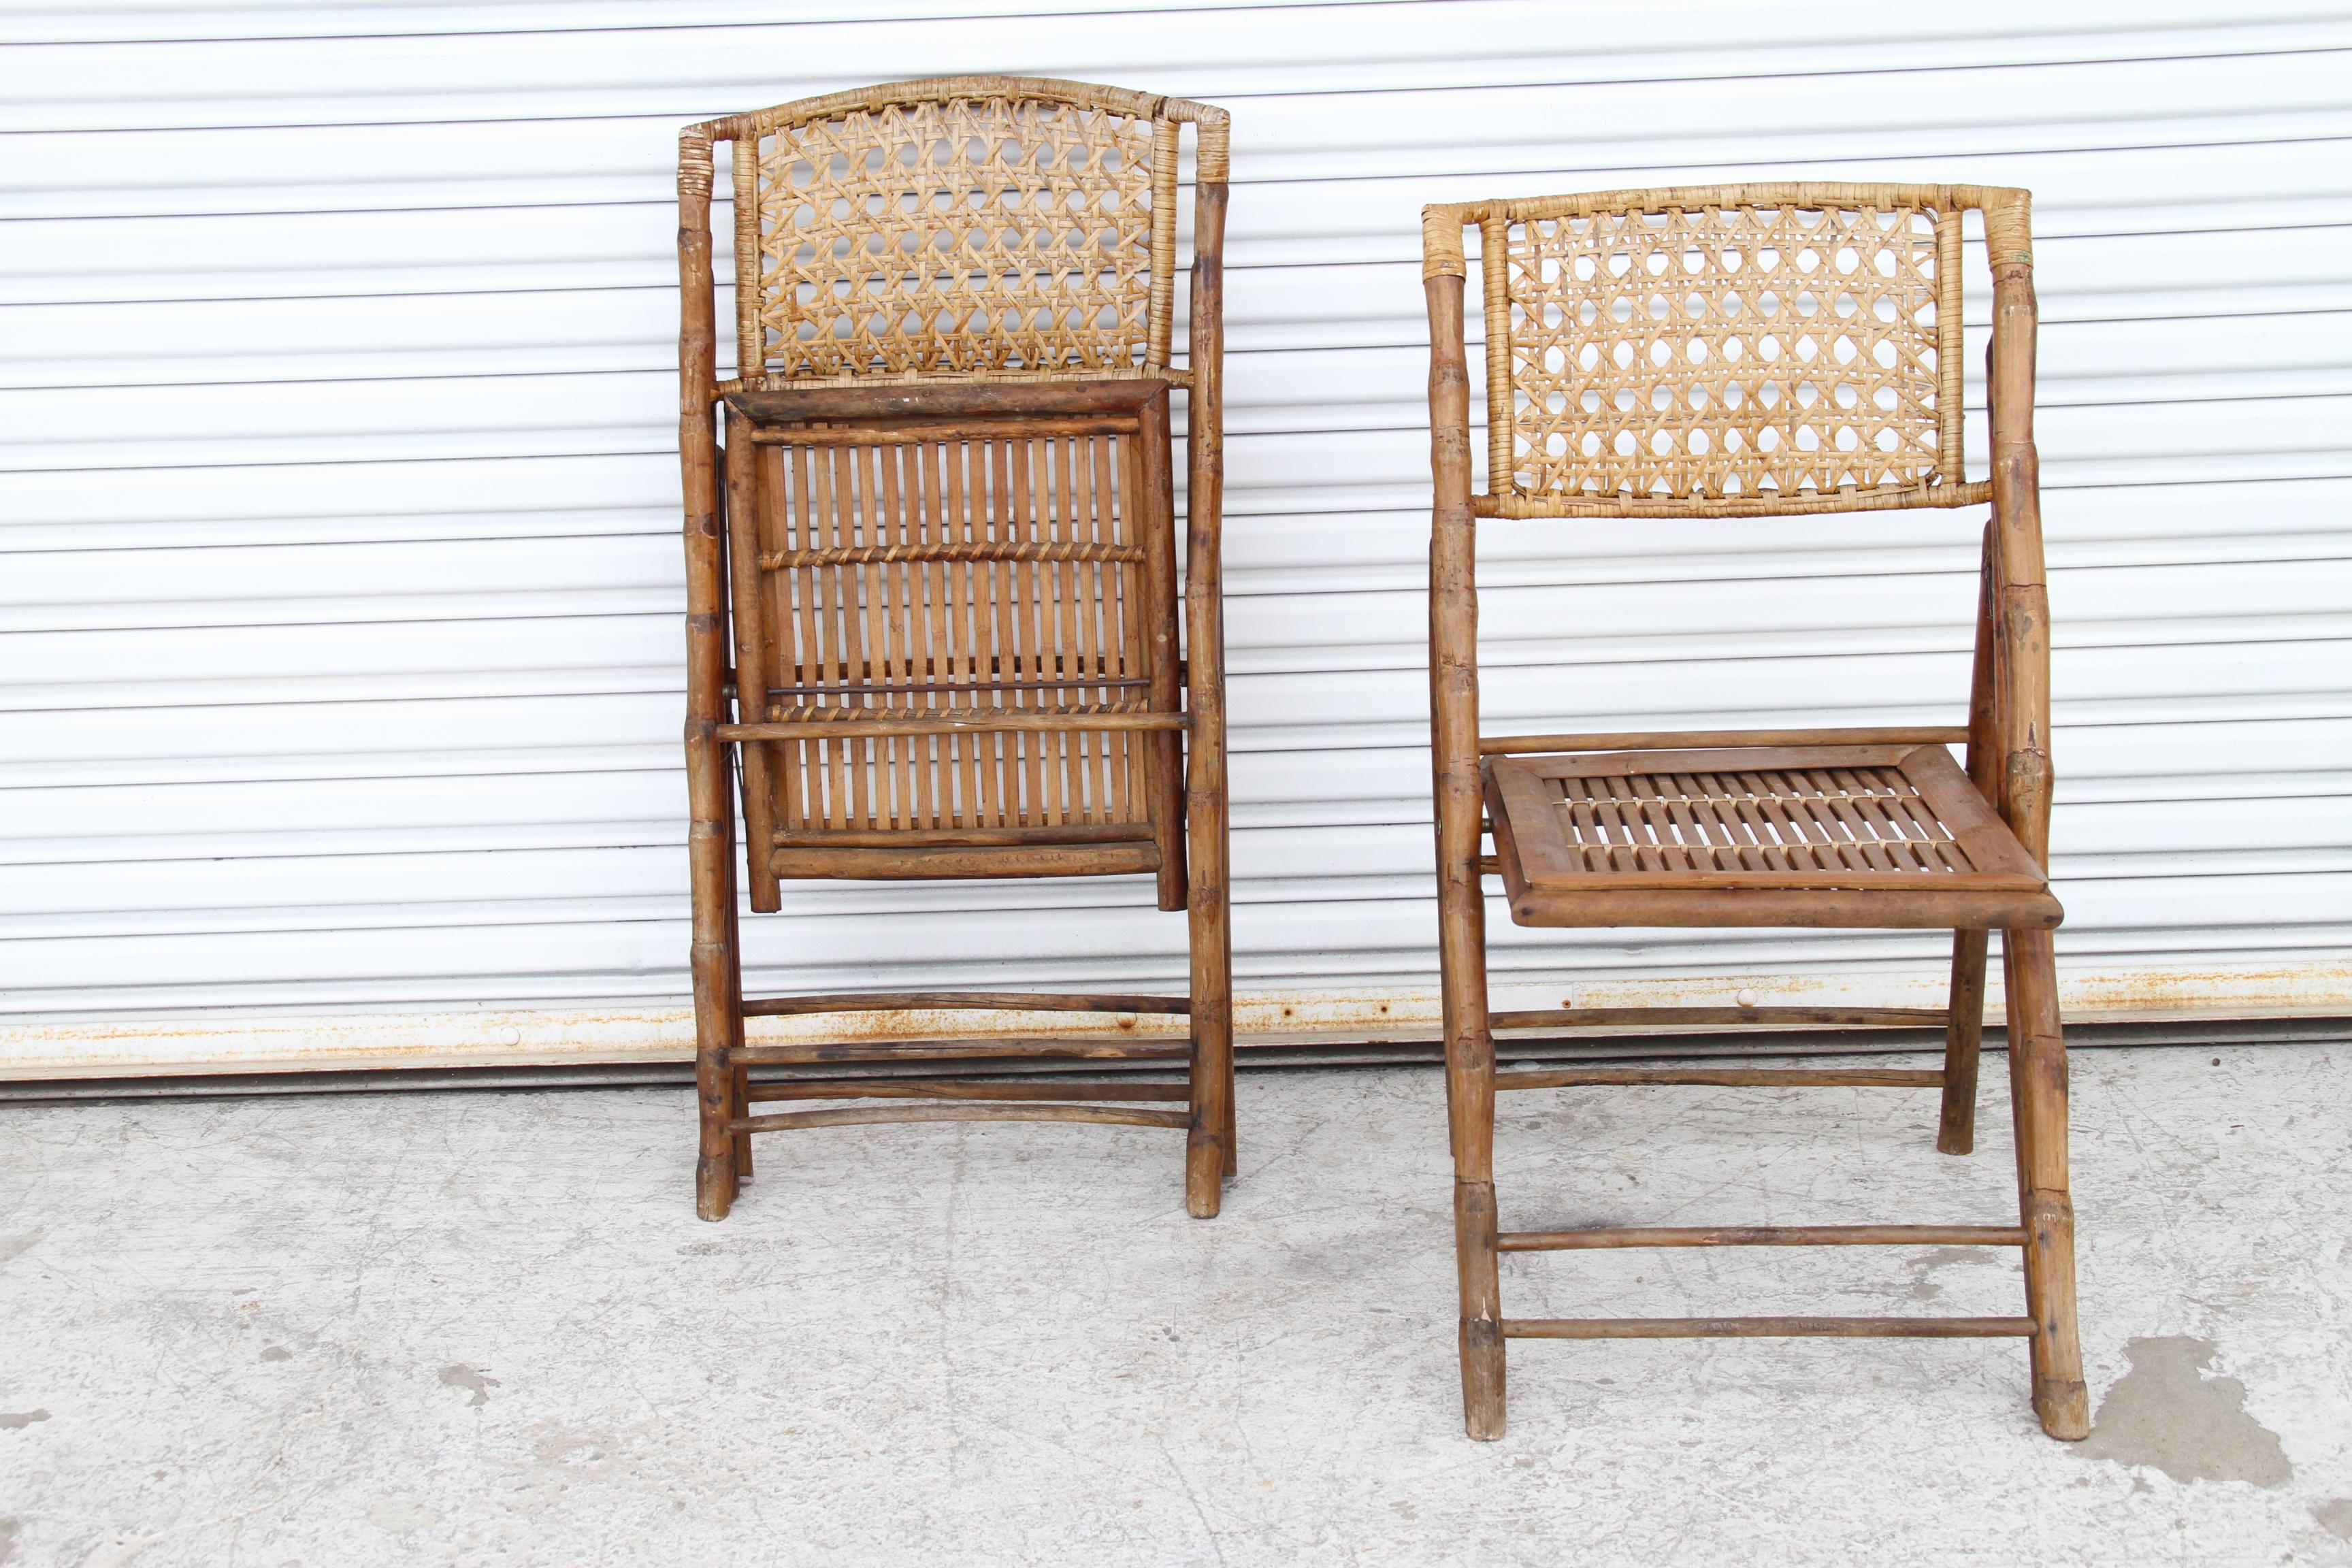 Pair of Vintage Folding Bamboo Chairs

Set of 2 vintage colonial campaign folding chairs, featuring bamboo frames shell with slatted bamboo seats and caned backs. 

Dims: 18